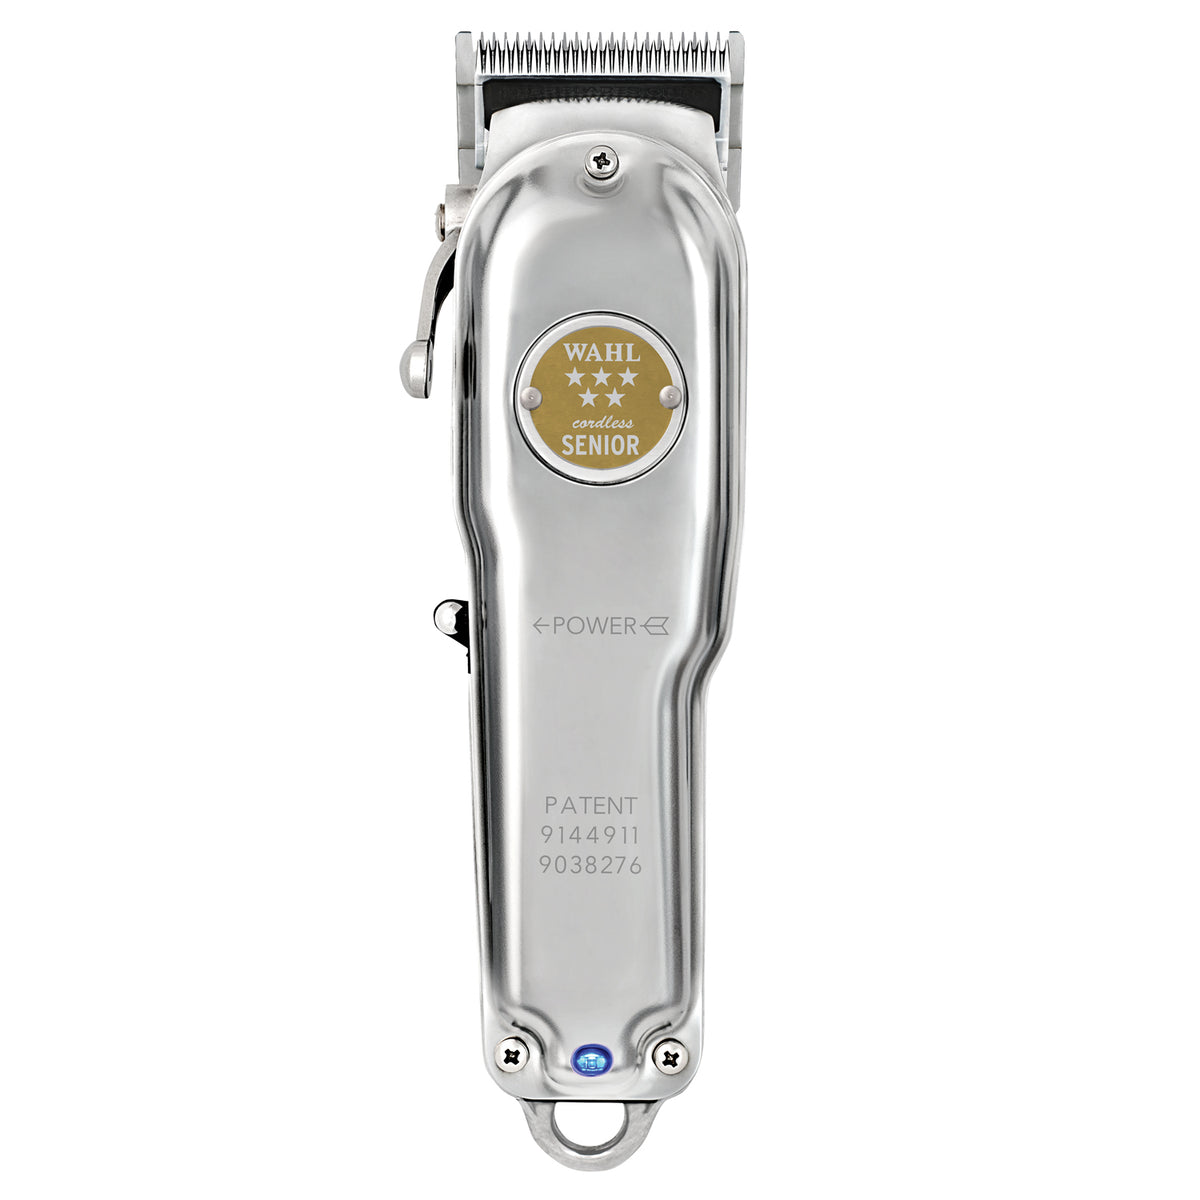 Wahl Professional Senior Metal Clipper Star Edition Charging Stand for Professional Barbers and Stylists - 4